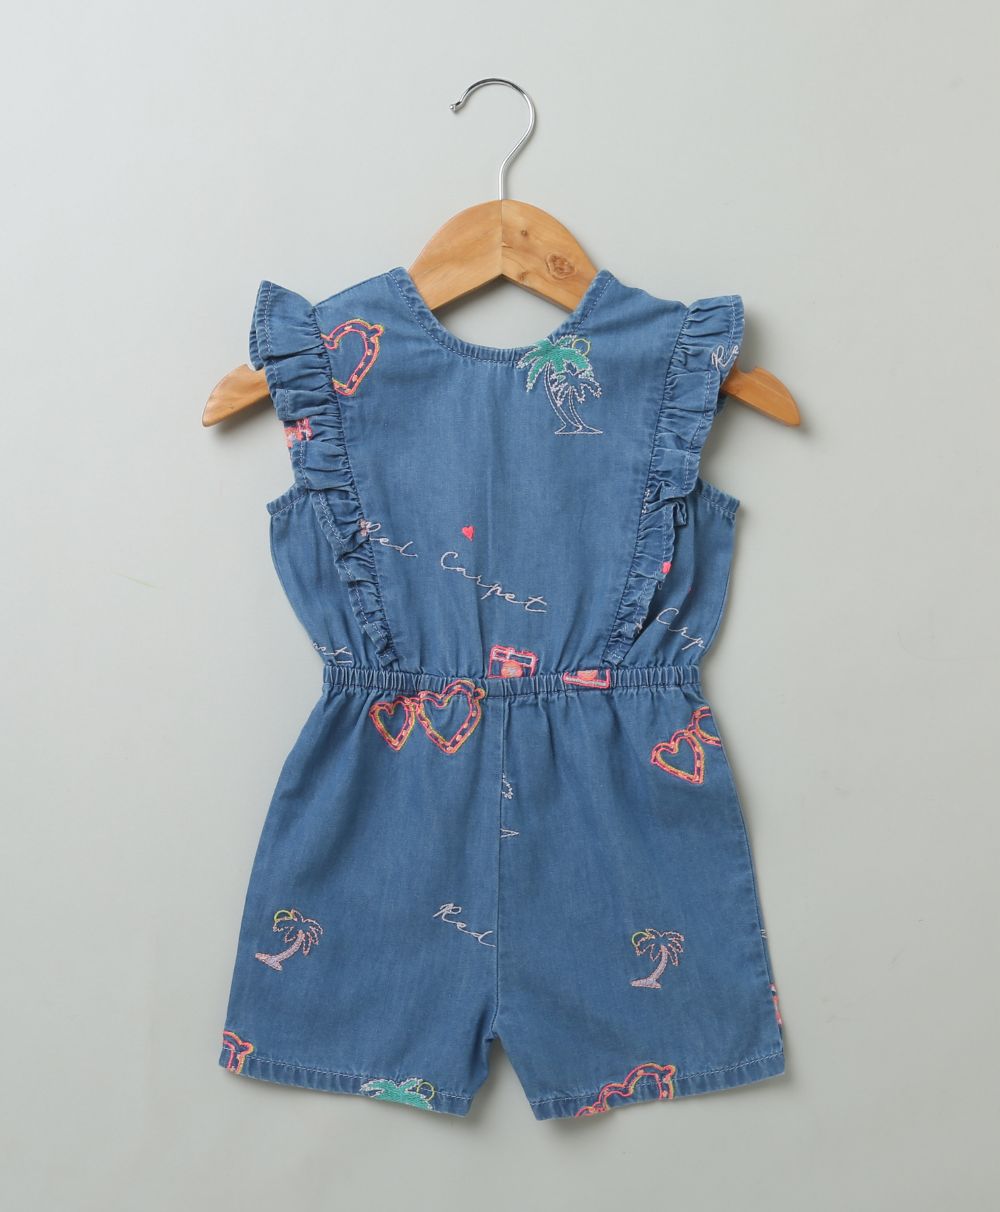 Buy Jimmy Jammy Baby Girl's Summer Dress Frock, Denim Dungaree with Cotton  T-shirt Party (Multicolor, 1-2 Years) at Amazon.in